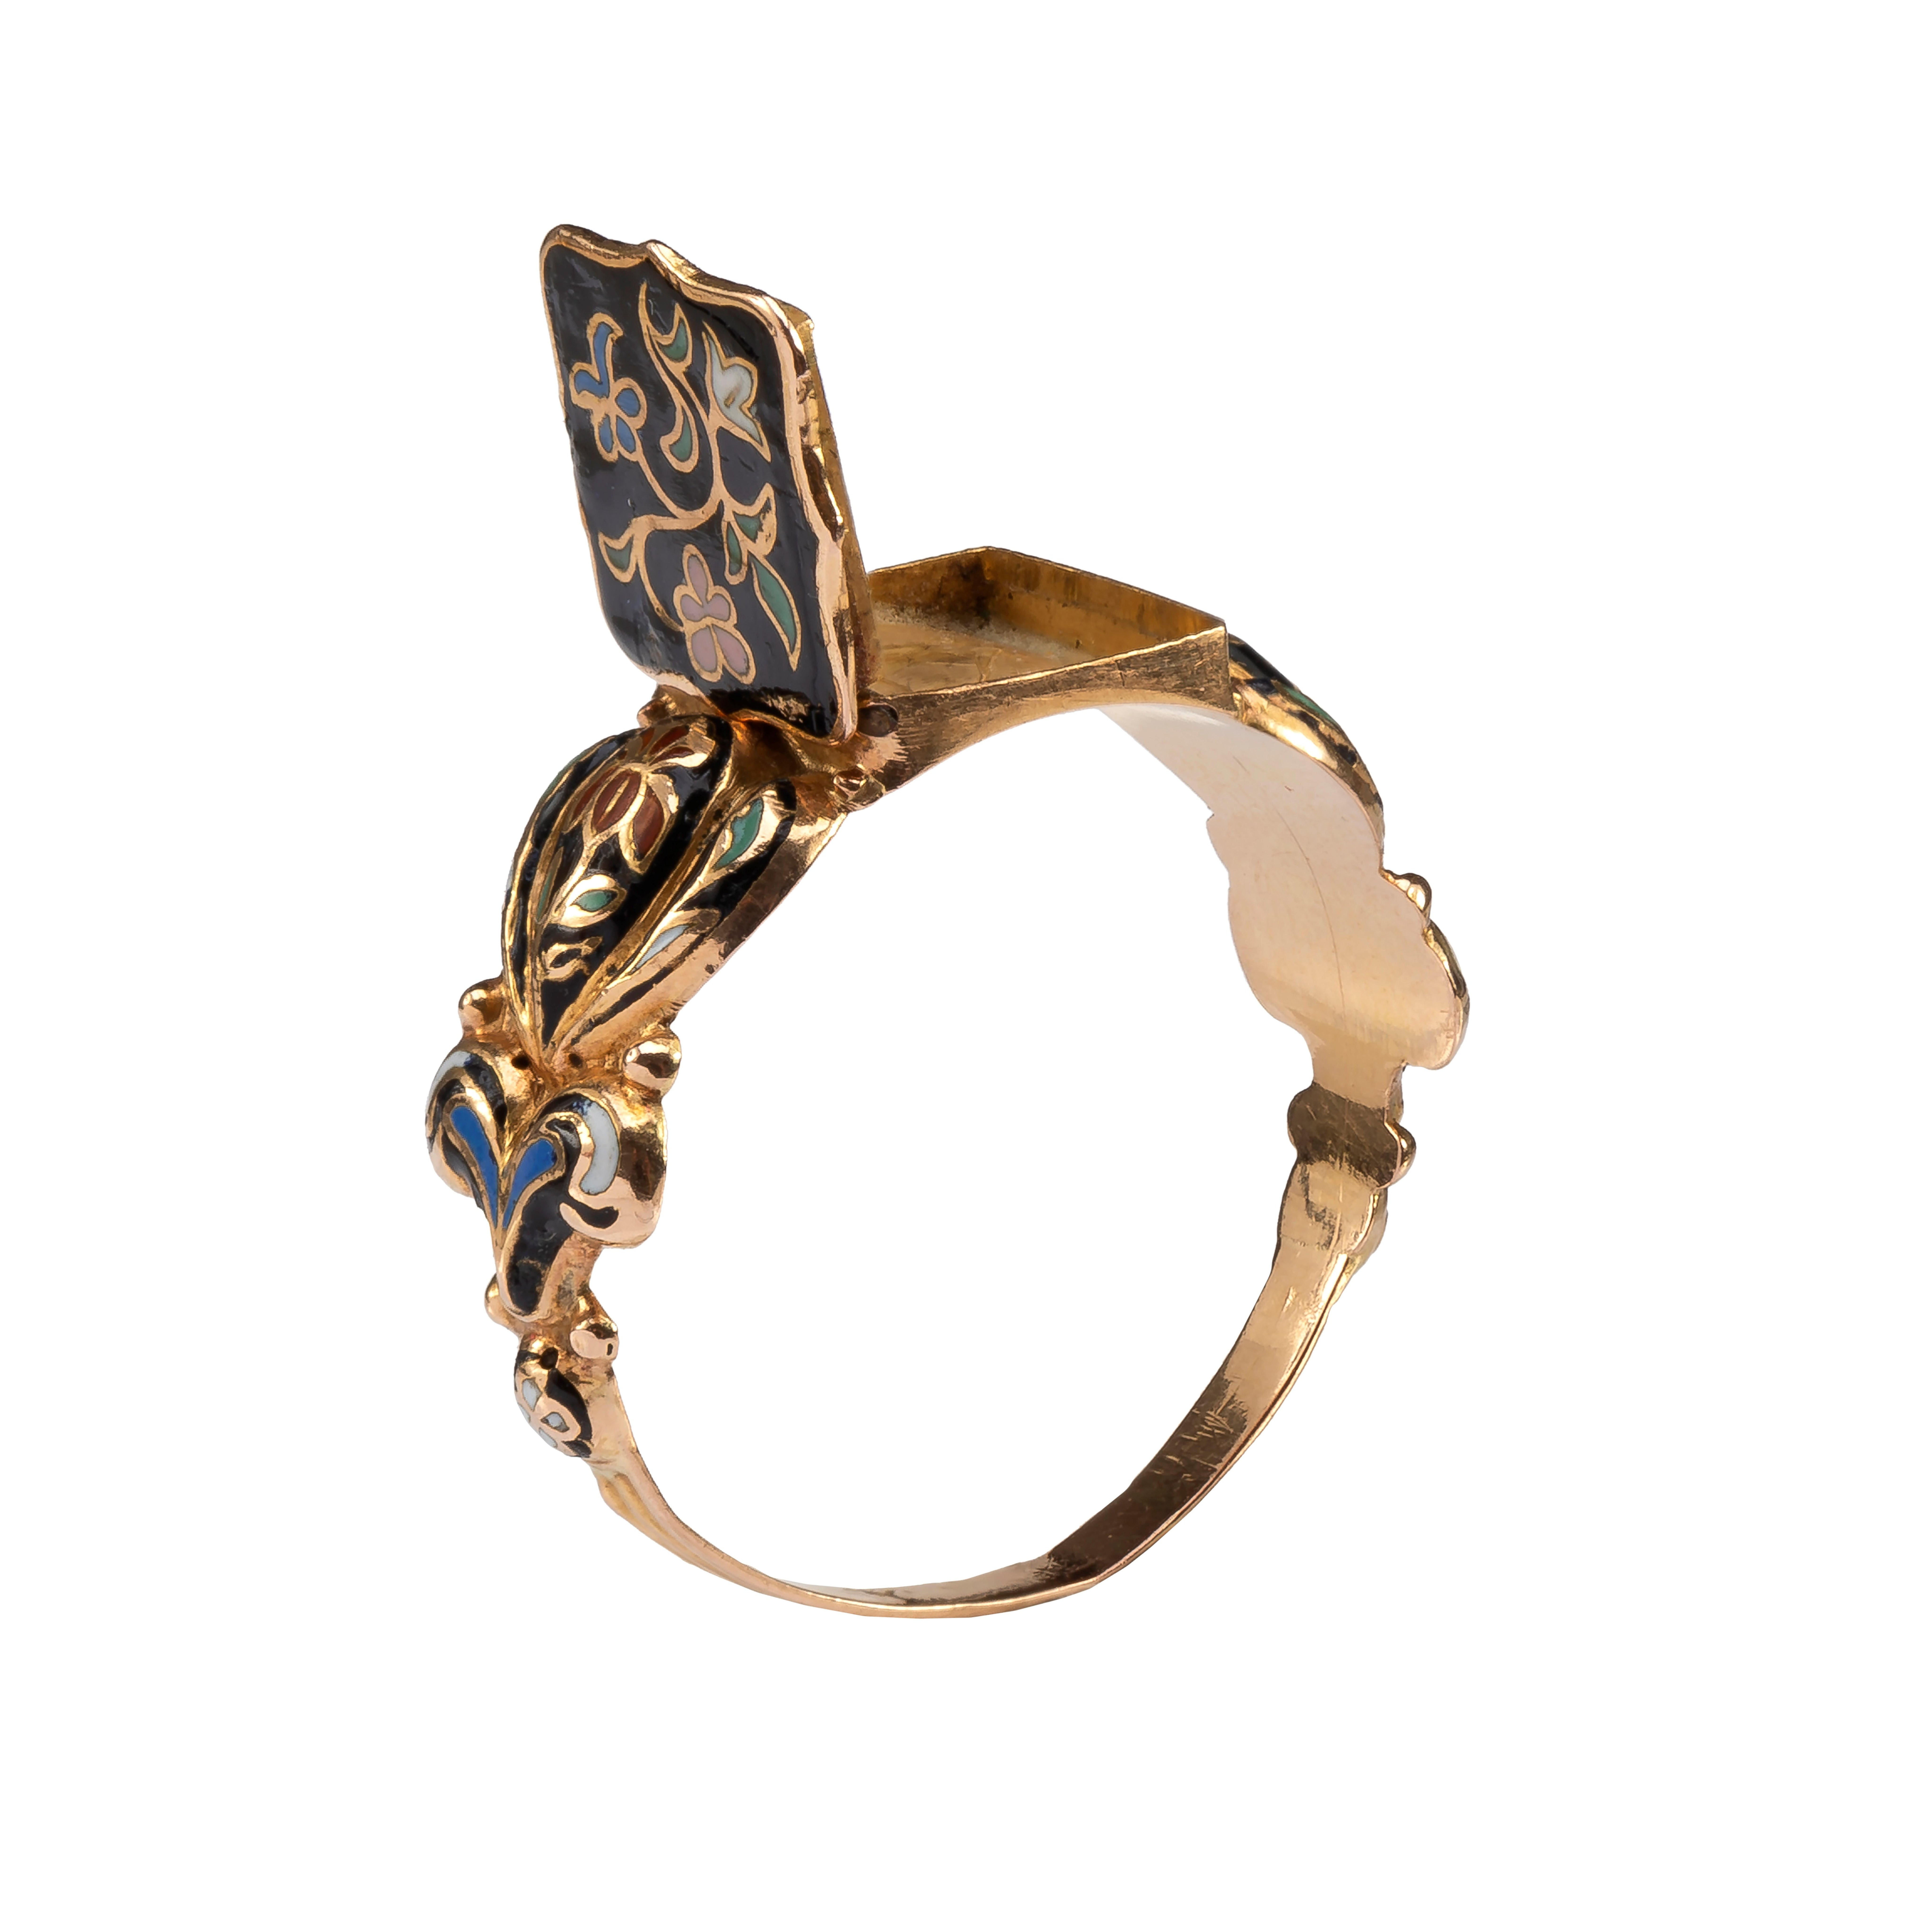 Early 19th-Century Enameled Gold Ring with Flowers and Concealed Compartment 2